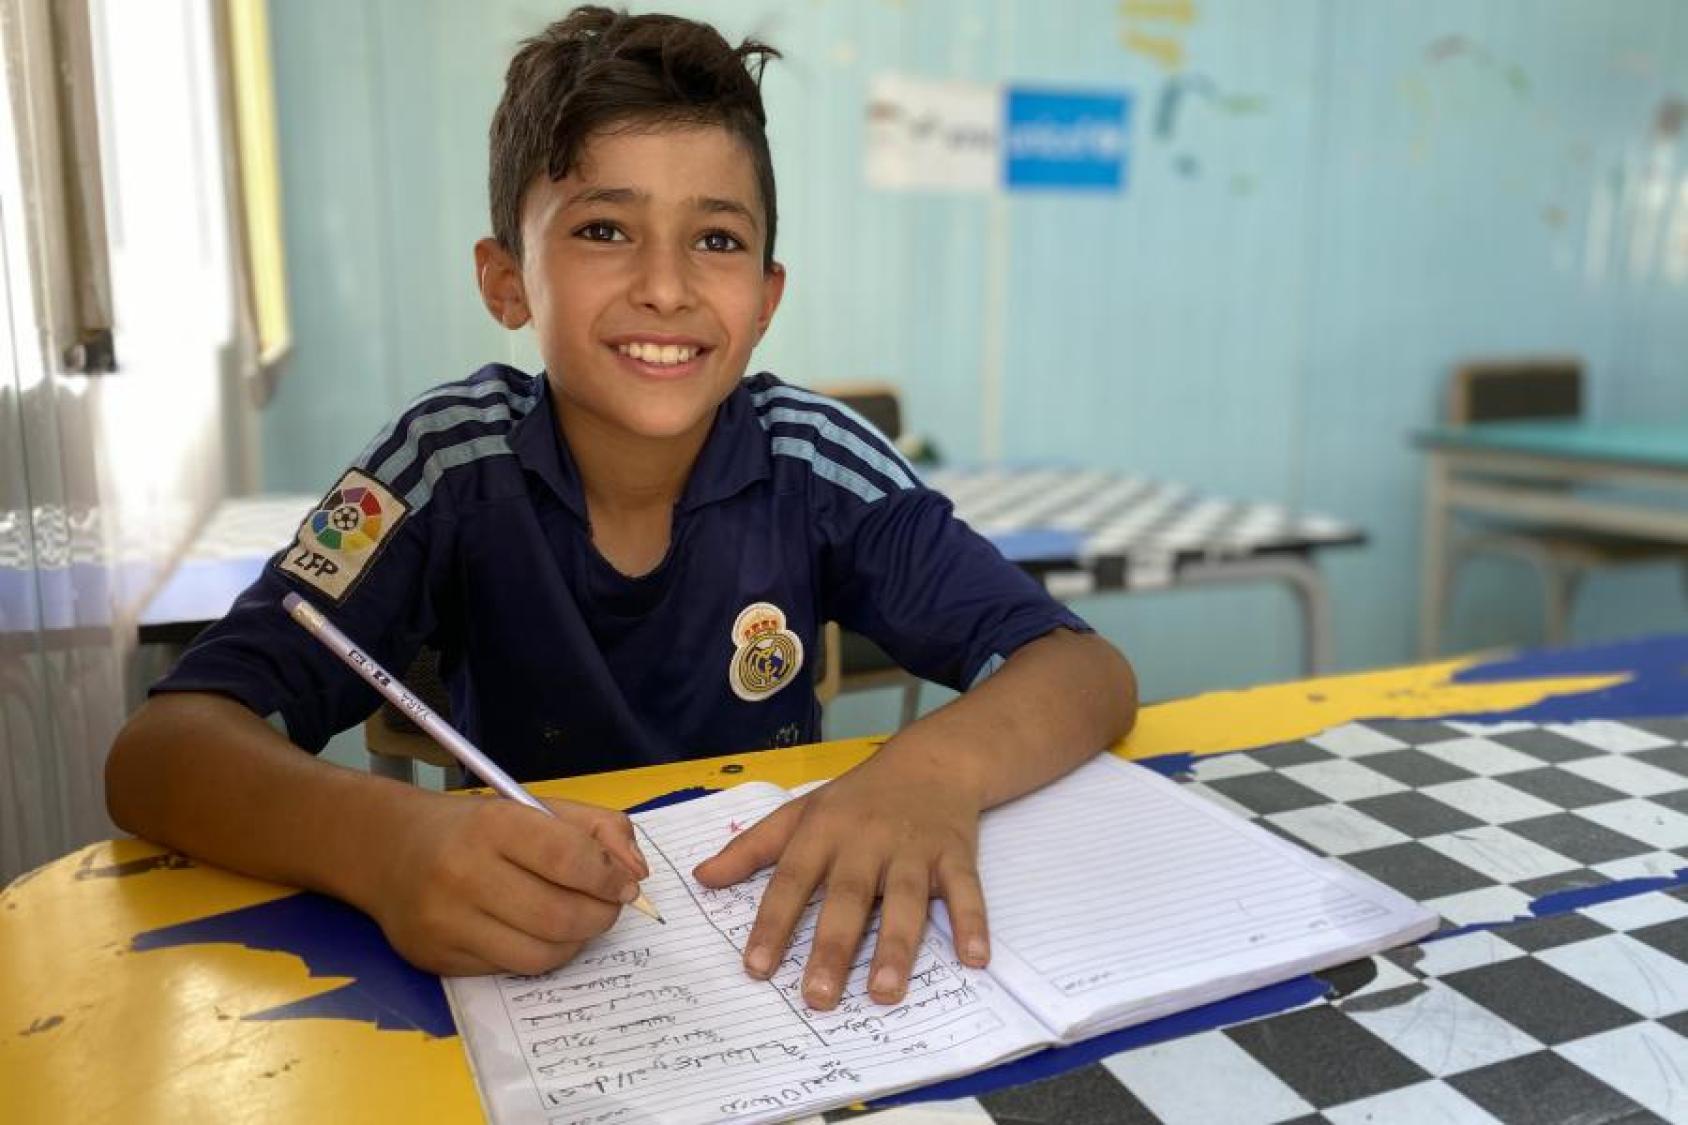 A young boy, wearing a blue jersey, writes in a notebook with a pencil. 